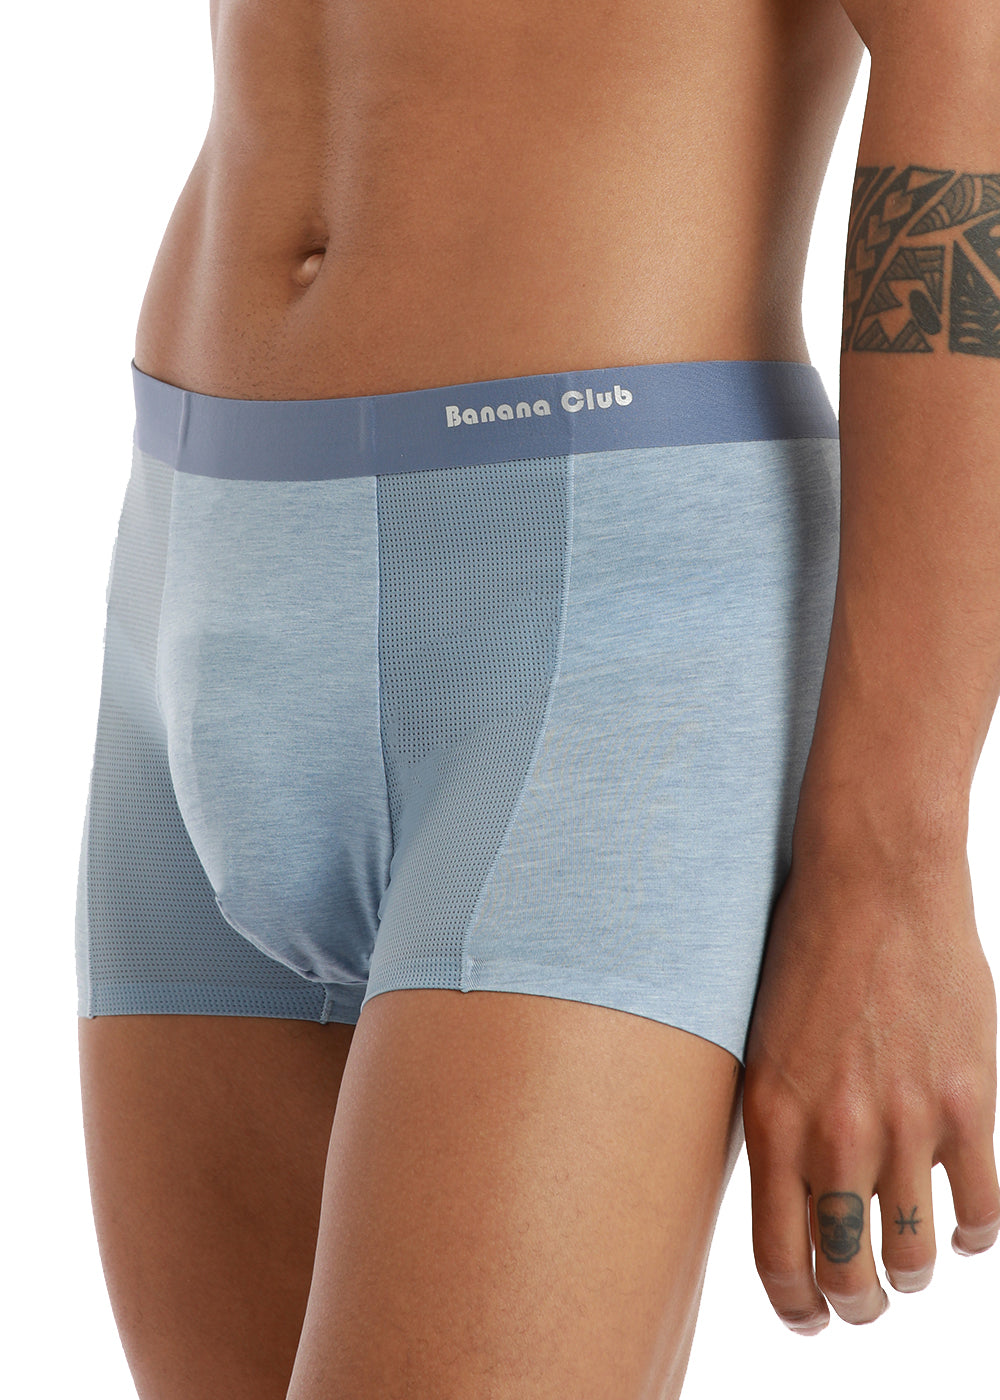 Frost blue low rise trunk